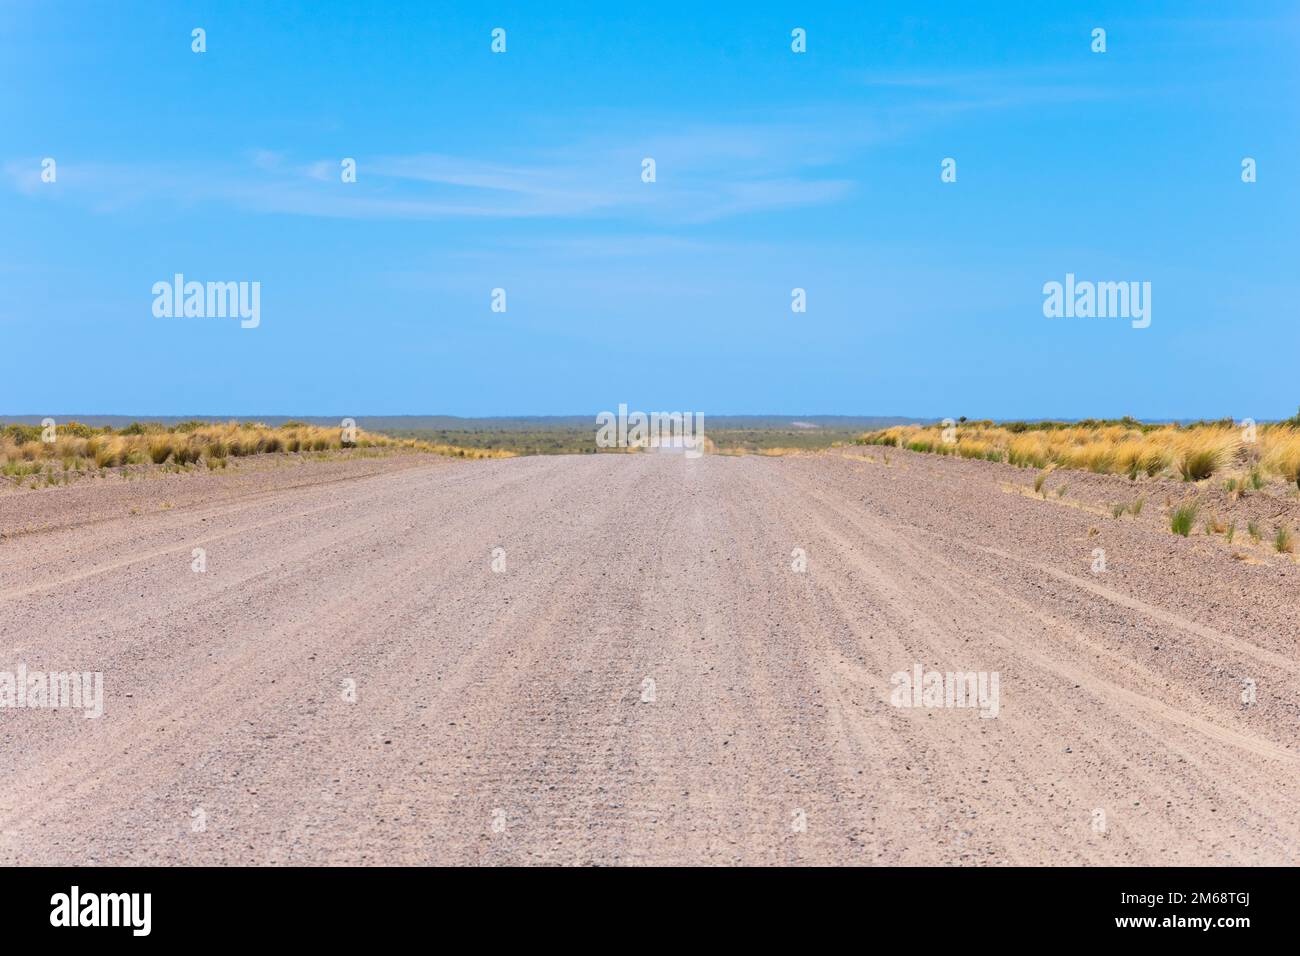 Gravel road in Peninsula Valdes, Province of Chubut, Argentina Stock Photo